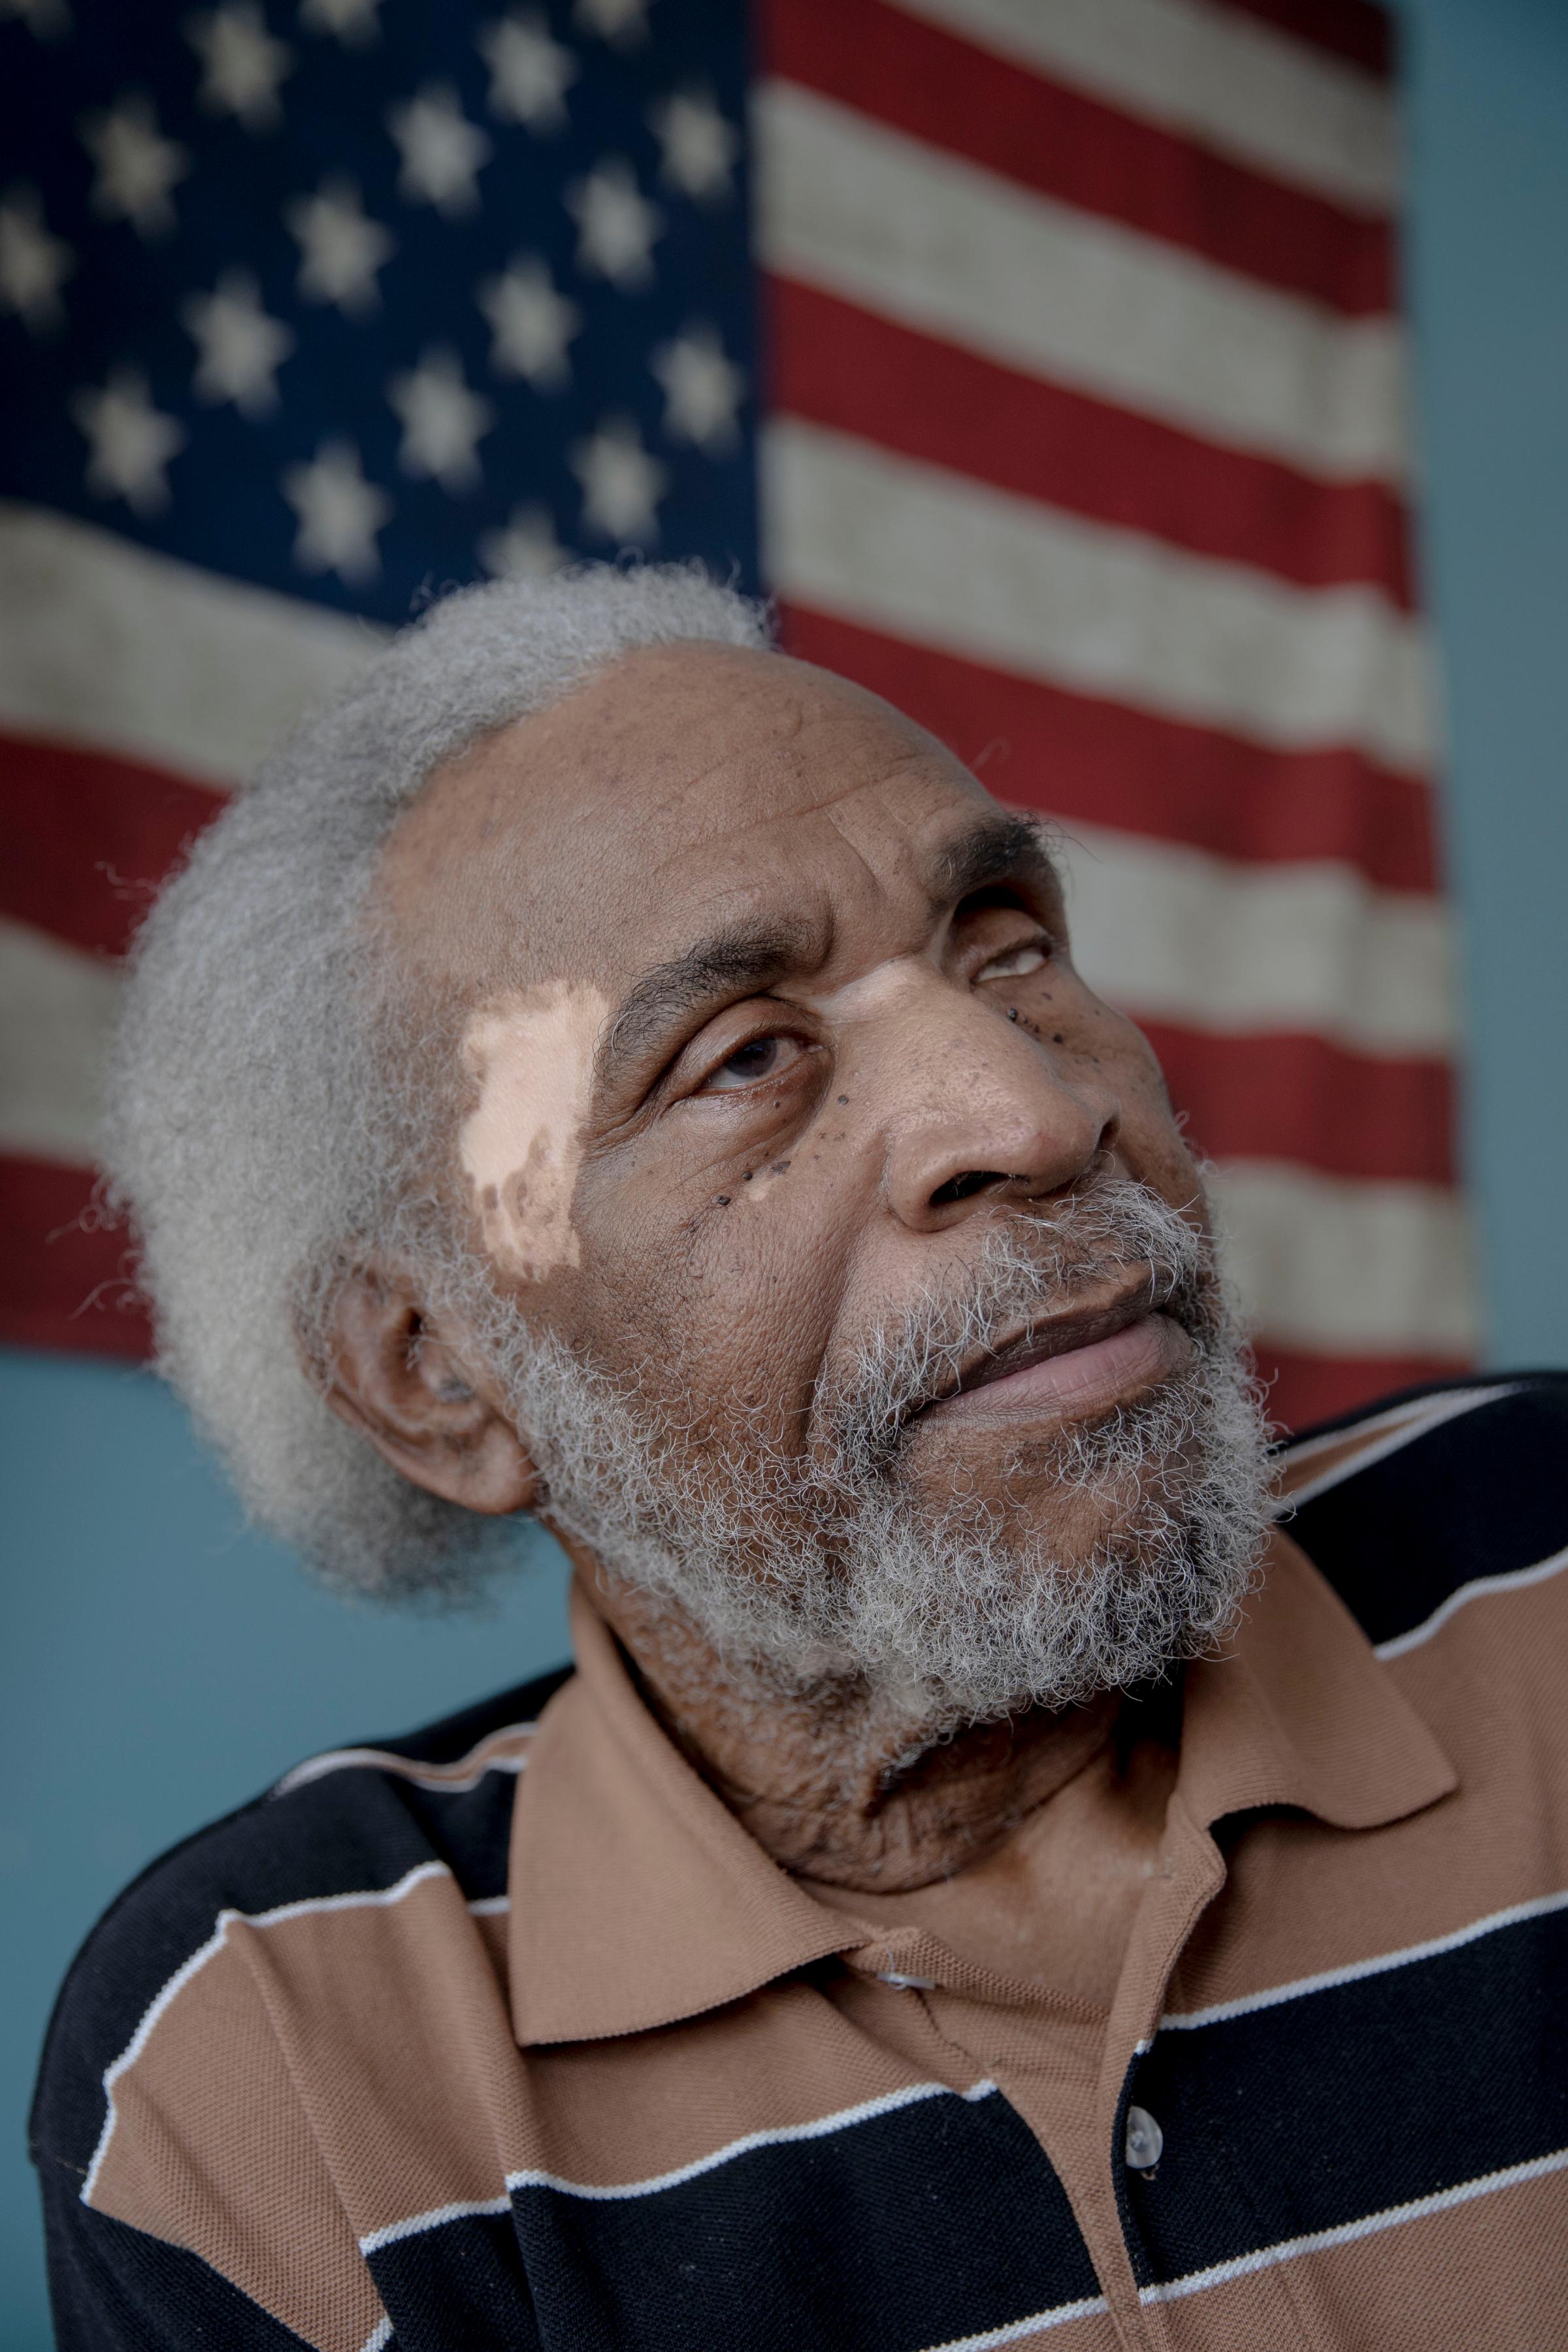 “Many times, I’ve felt like I was starving,” says veteran Eugene Milligan who is blind, lost half his right leg to diabetes, gets dialysis for kidney failure and has struggled to get enough to eat at his Memphis home. (Andrea Morales for Kaiser Health News)